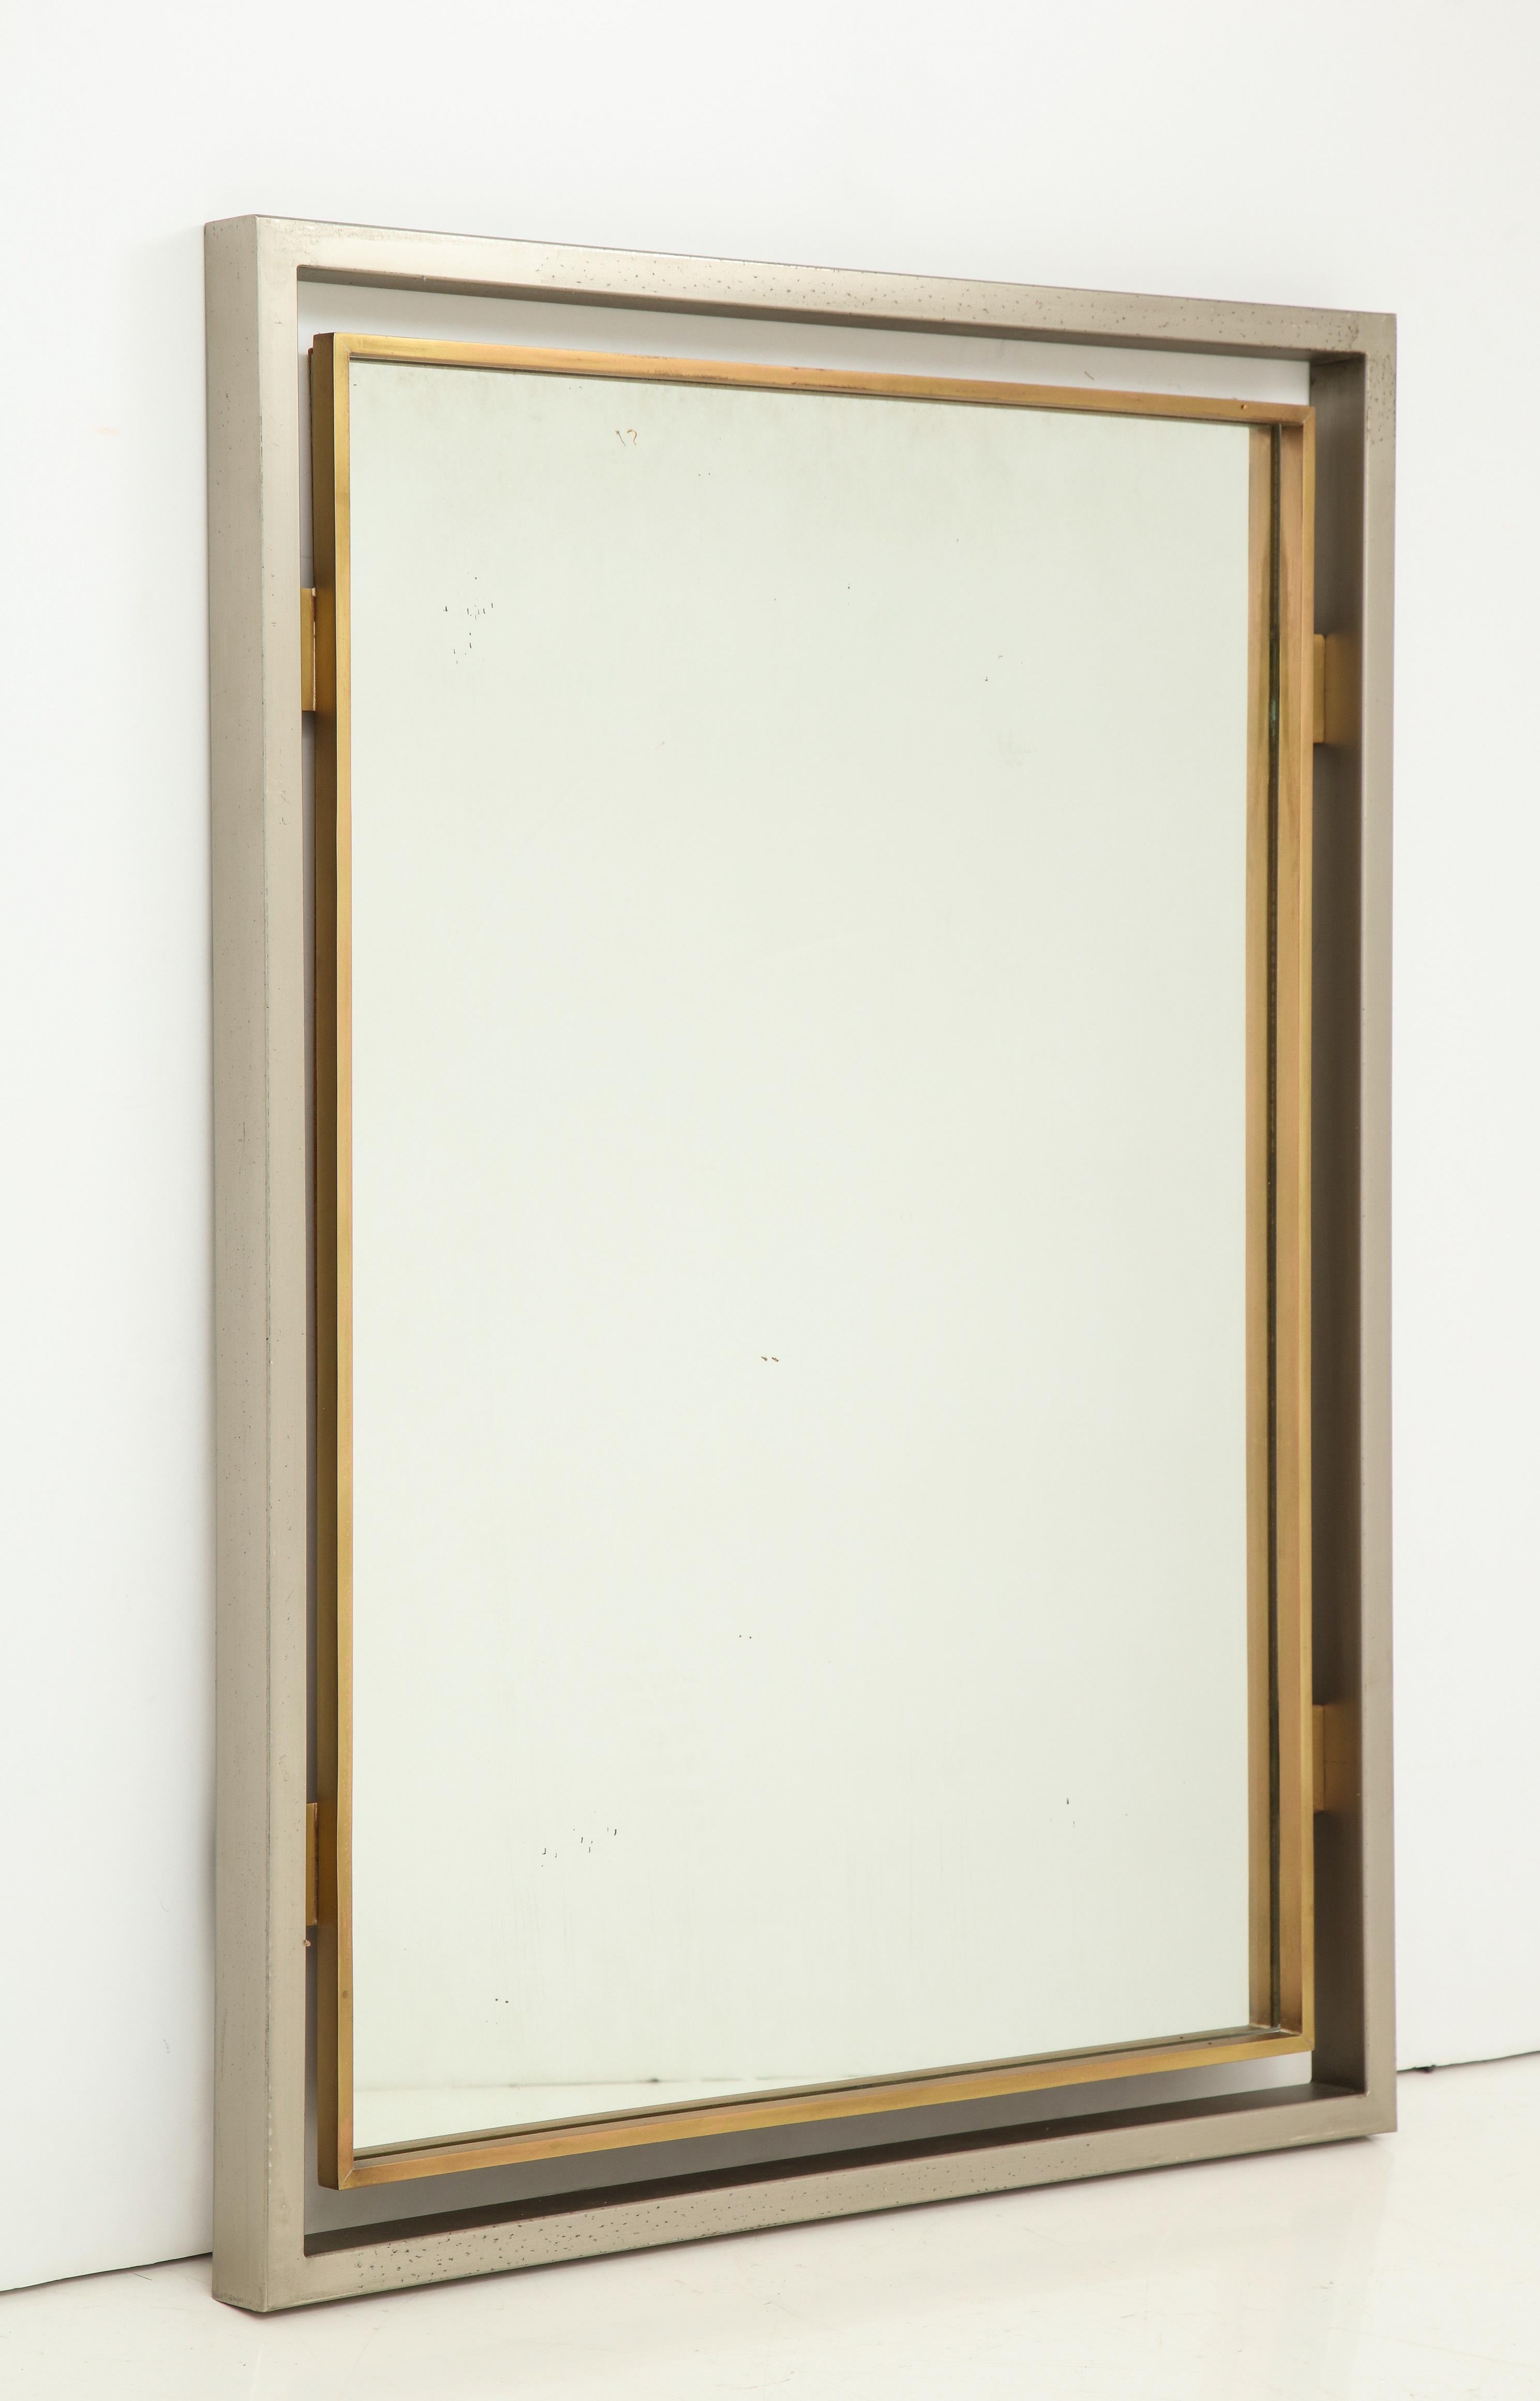 Solid steel and brass elegant Modernist mirror by Guy Lefevre for Maison Jansen, French 1970s. 
Oxidation spots on steel frame (please see pictures), otherwise in great vintage condition.
 